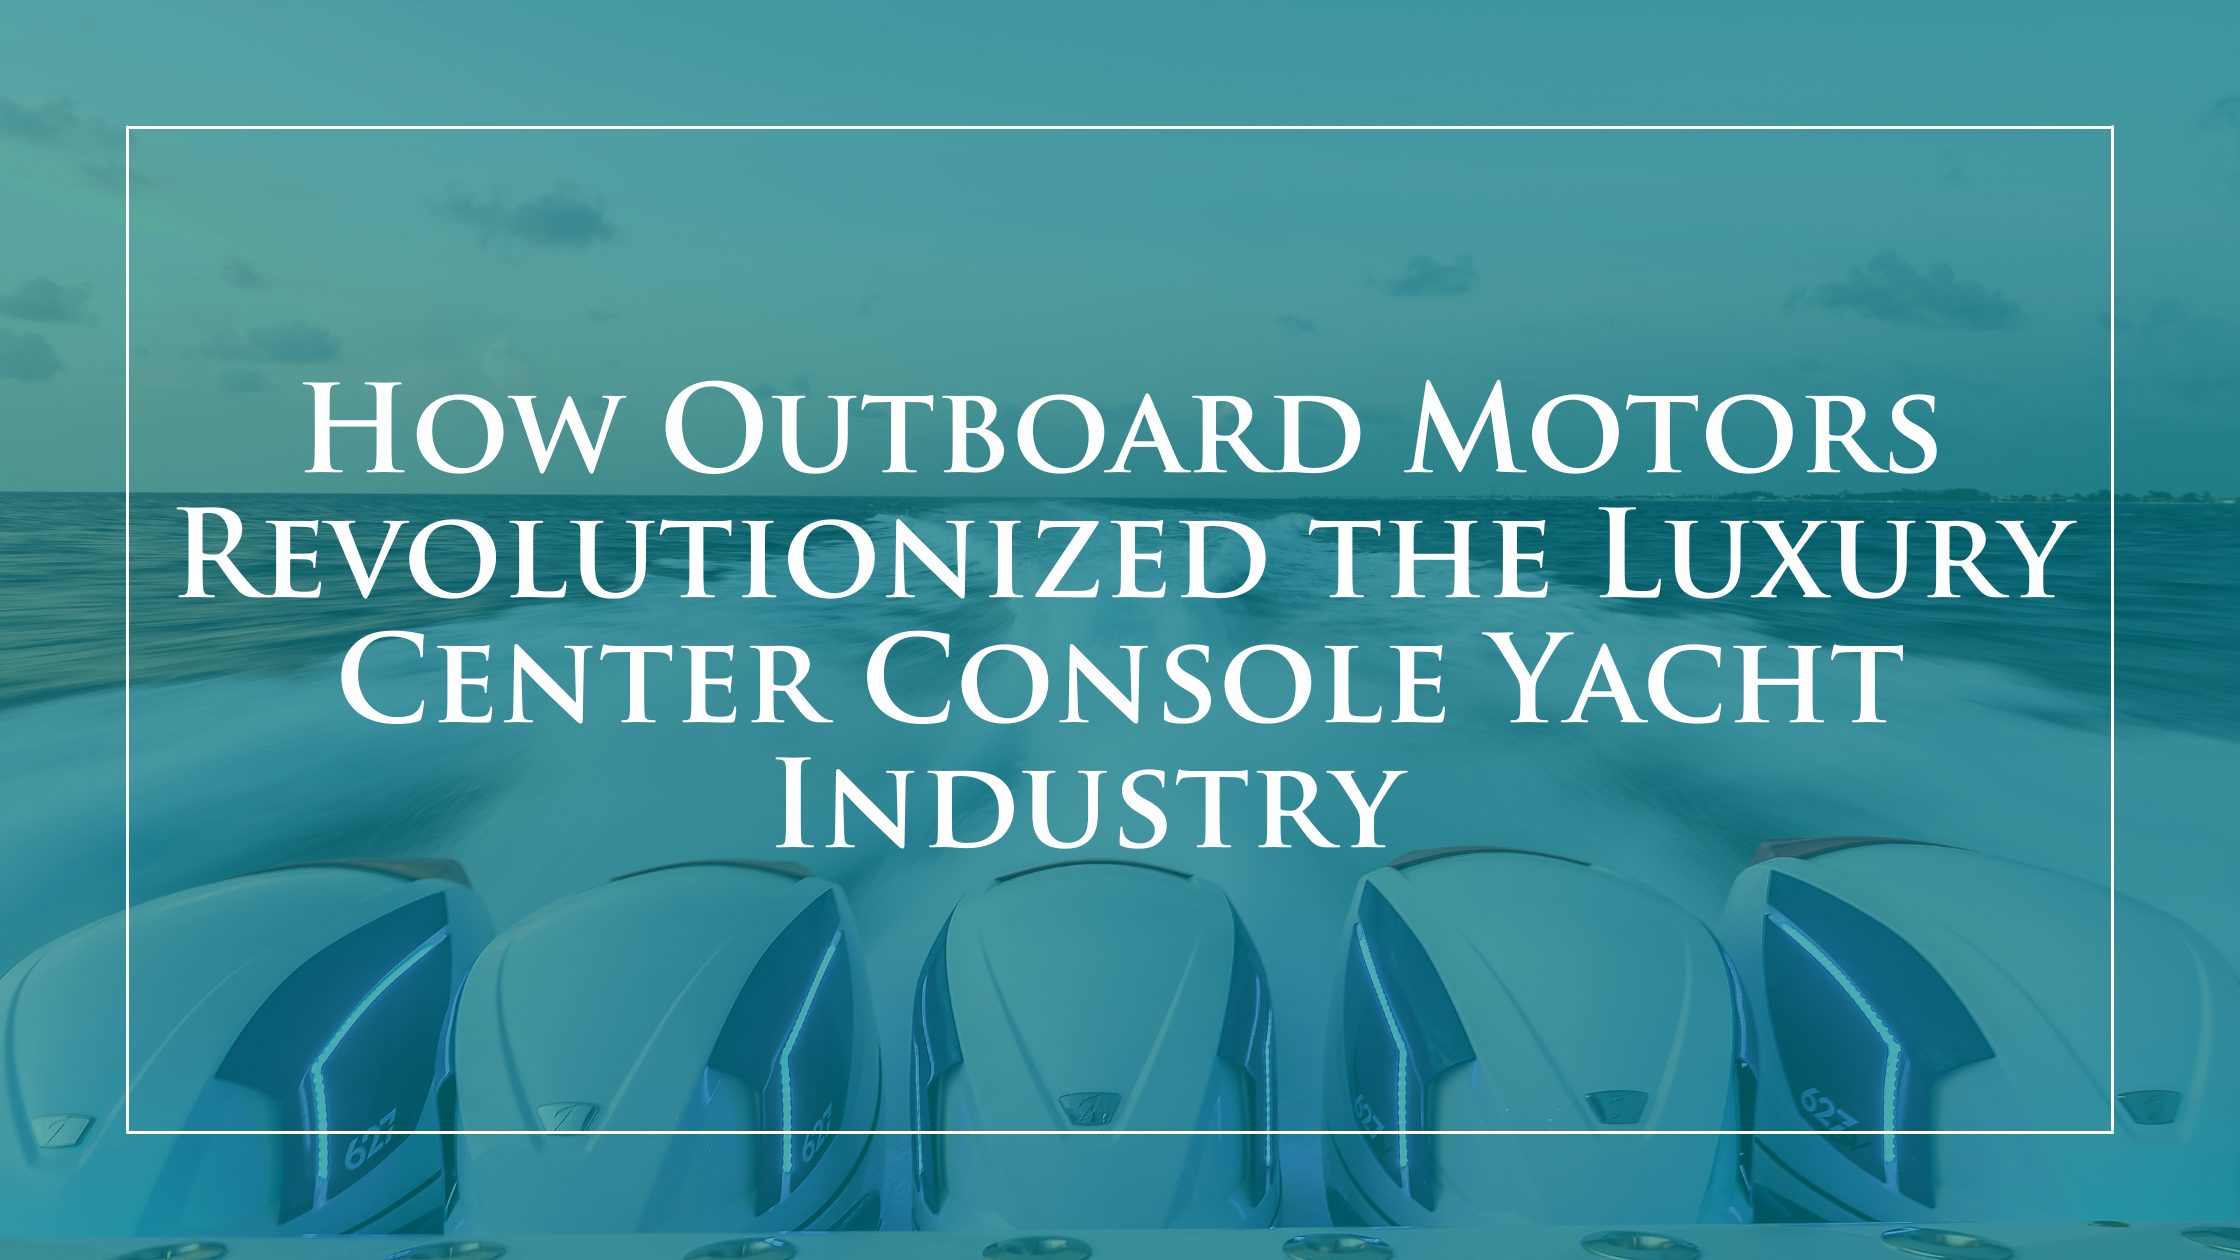 How Outboard Motors Revolutionized the Luxury Center Console Yacht Industry